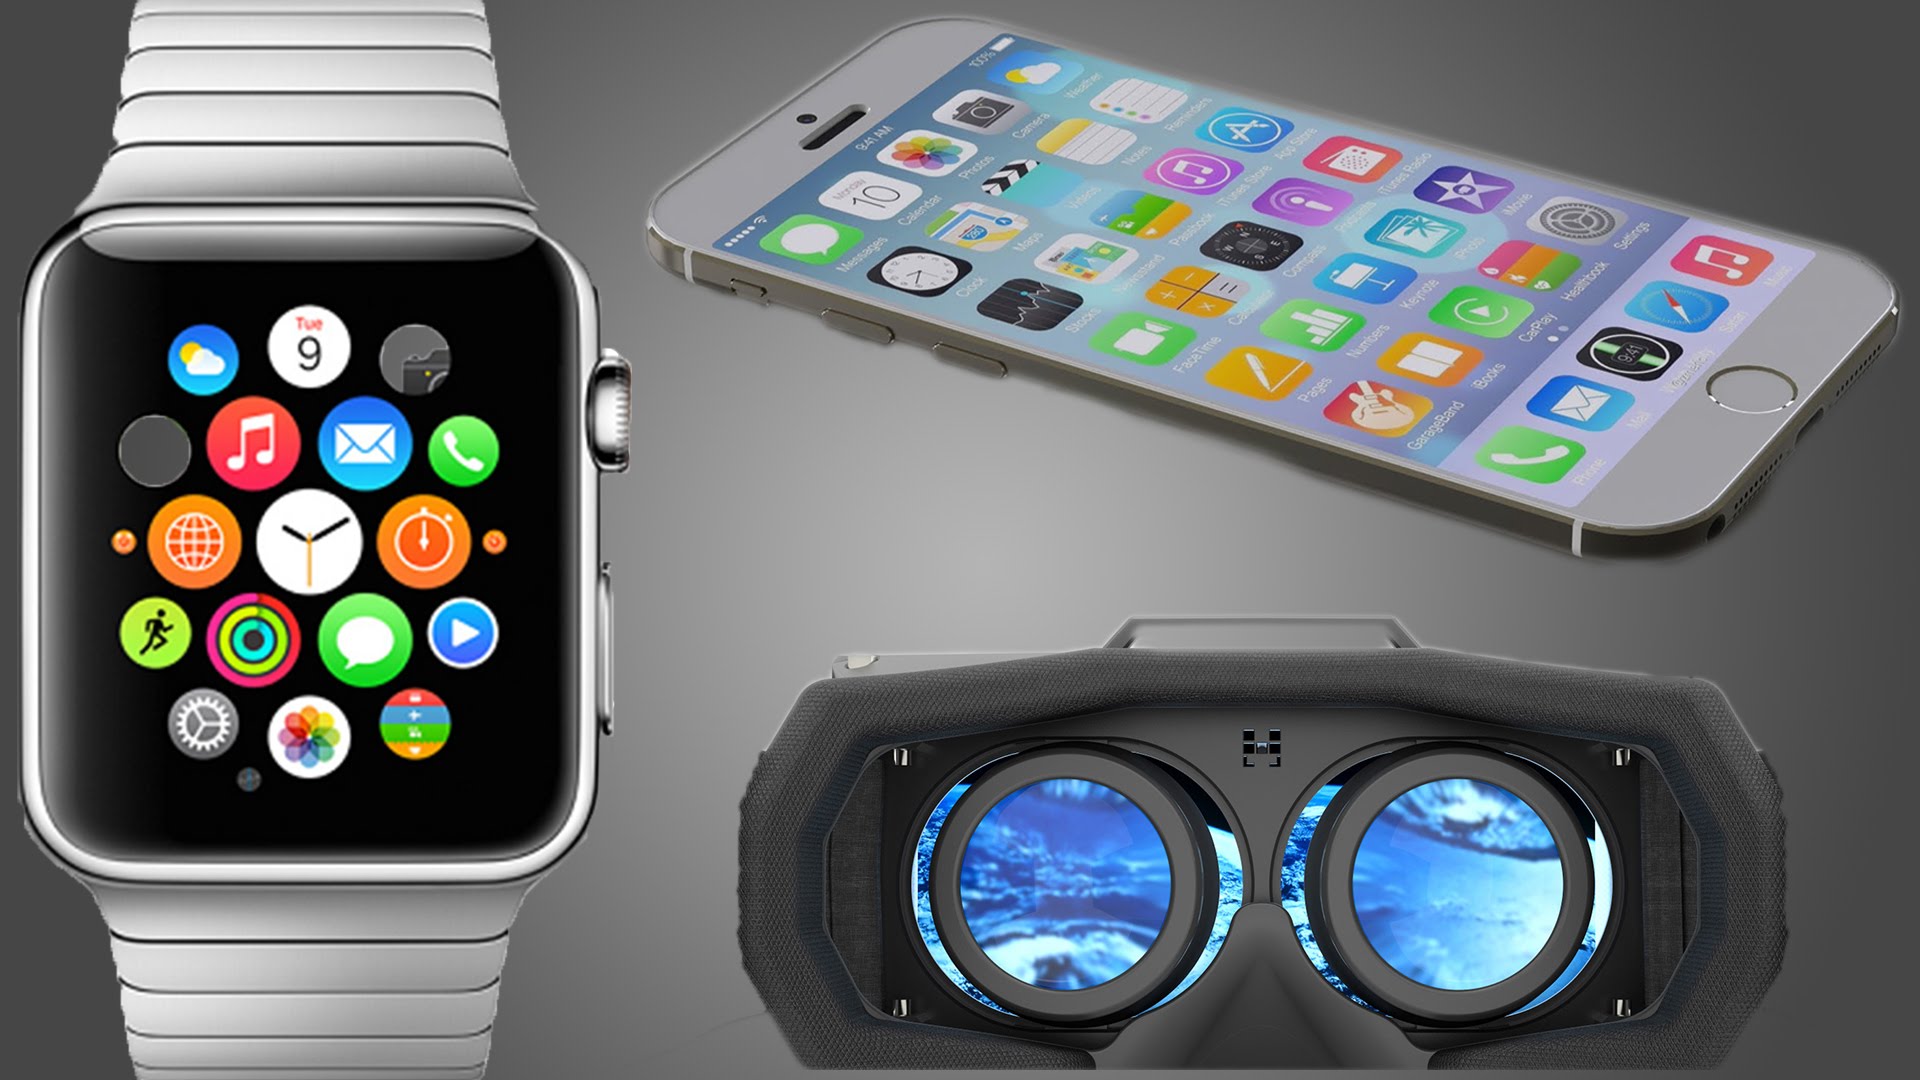 10 Gadgets and Technology that will rock 2010